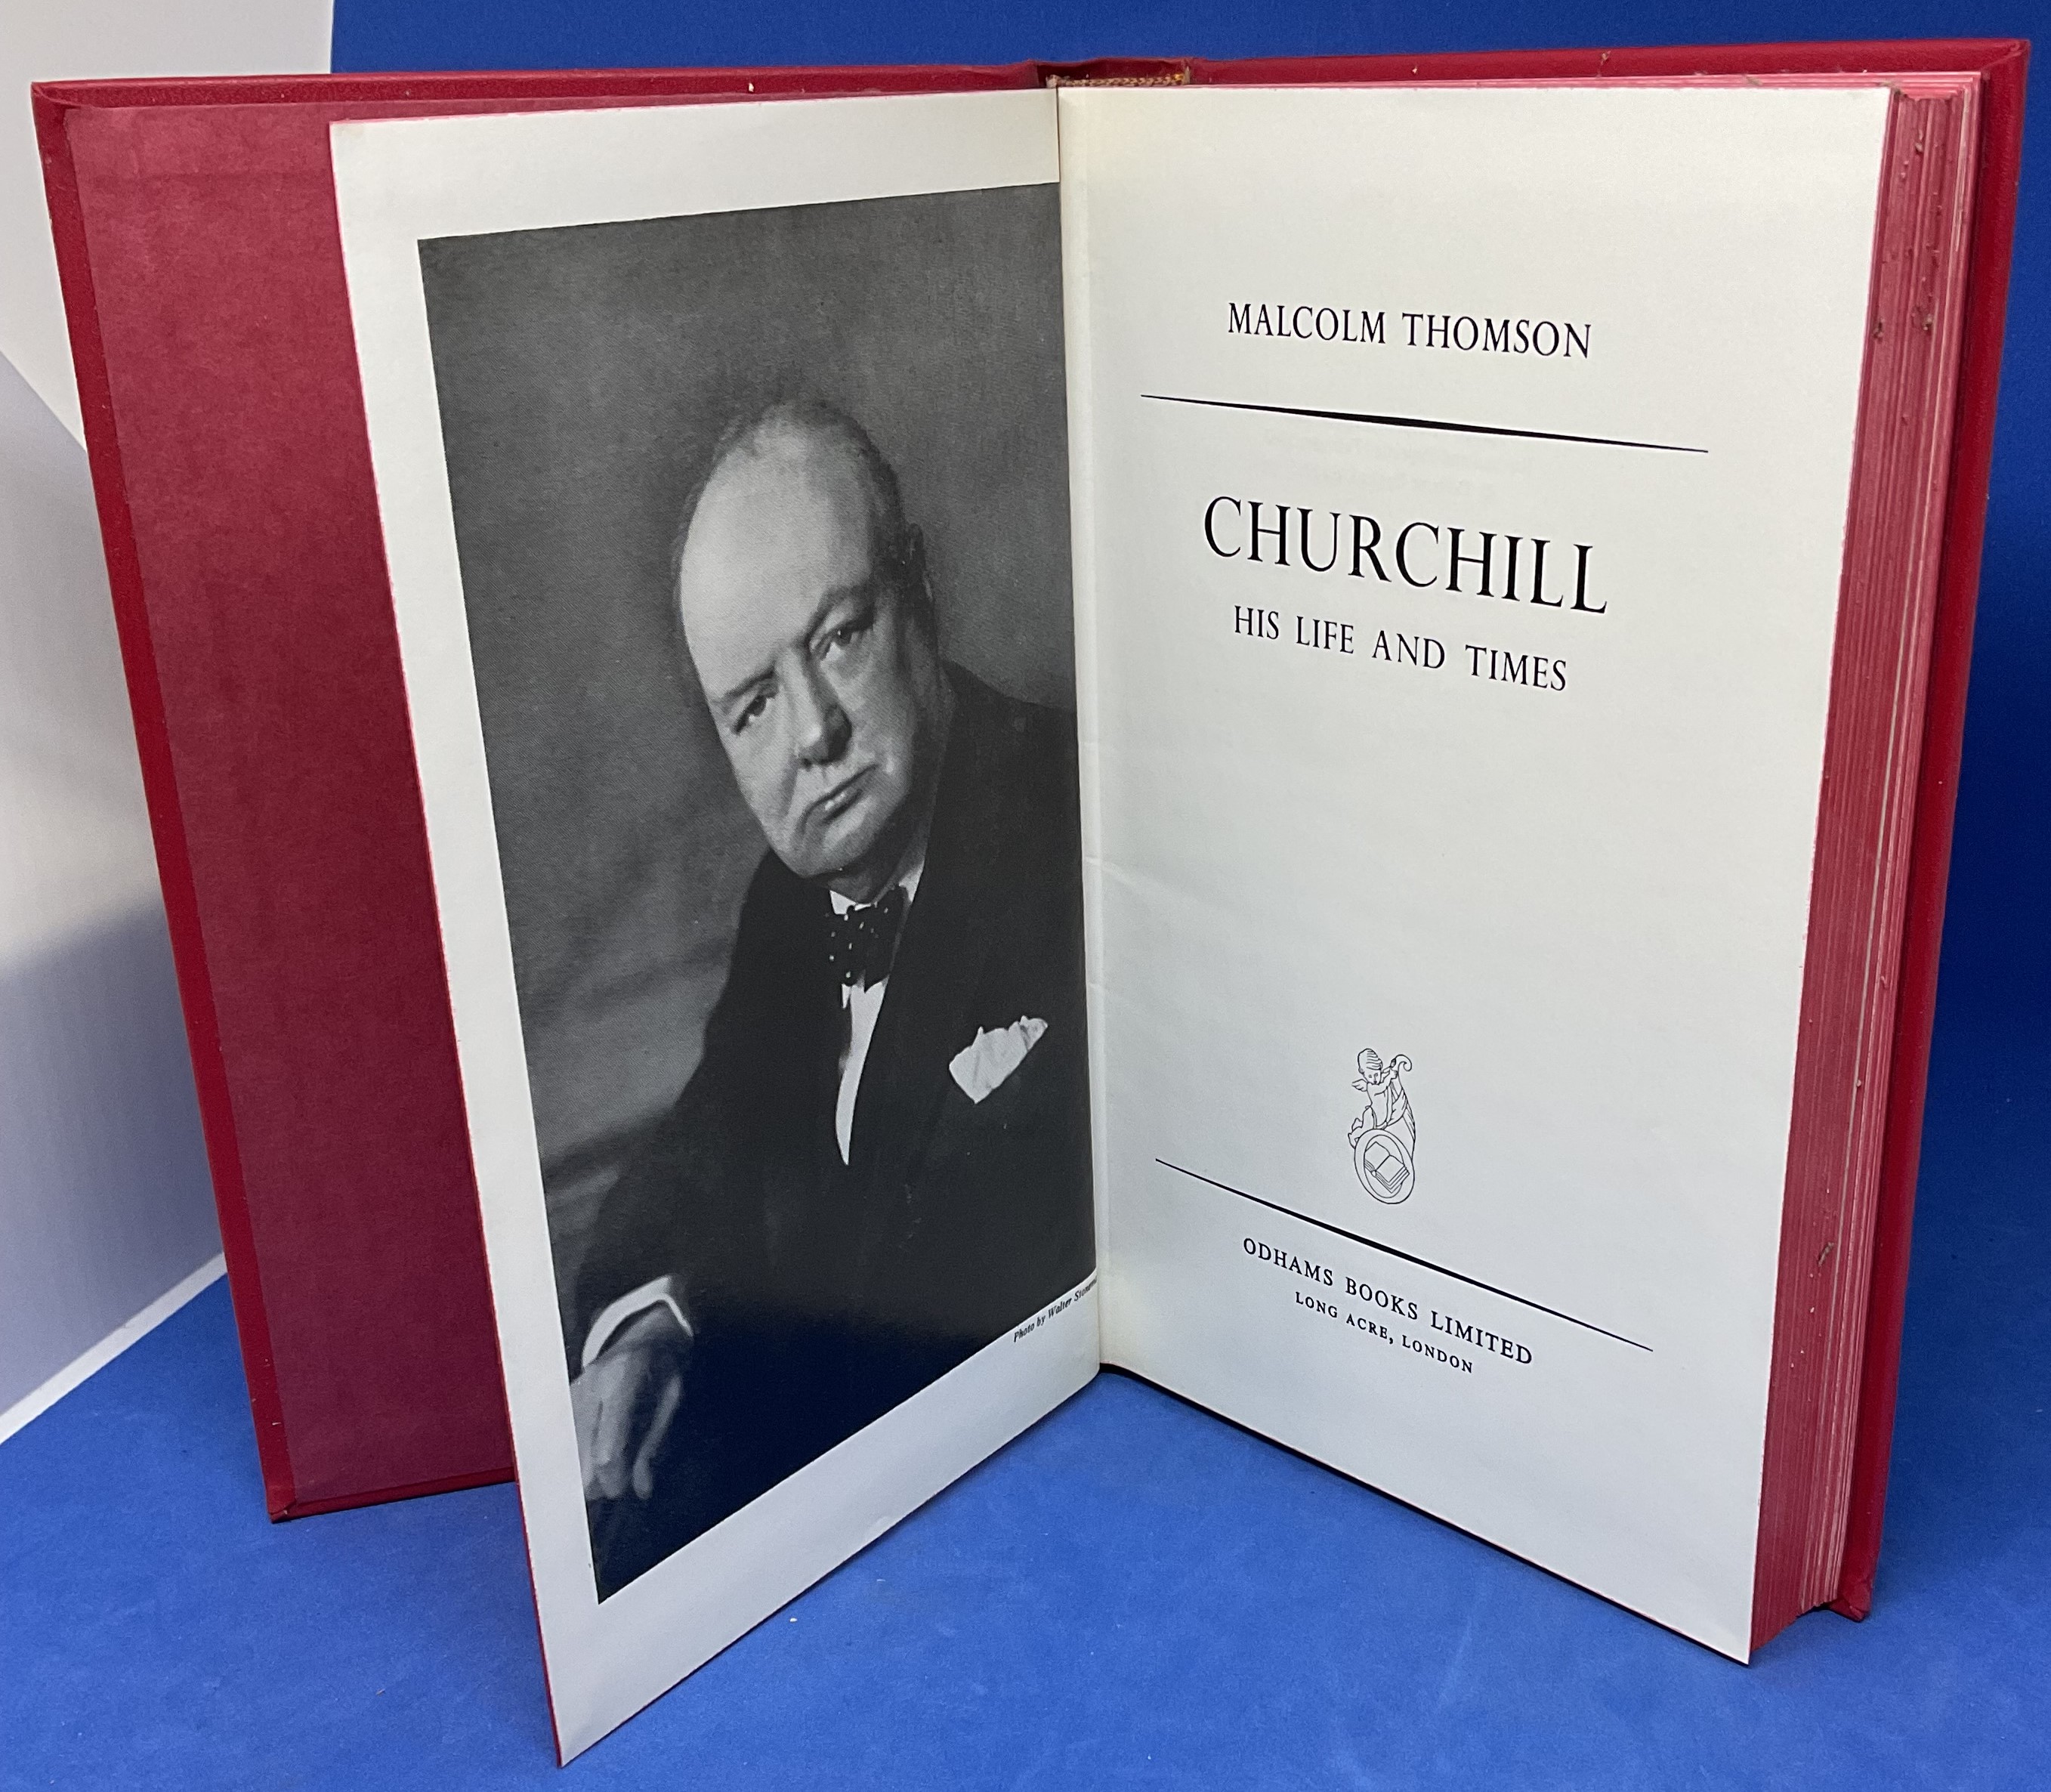 Winston Churchill Book Collection of 3 Books. A Churchill Anthology Hardback Book, Churchill, His - Image 2 of 4